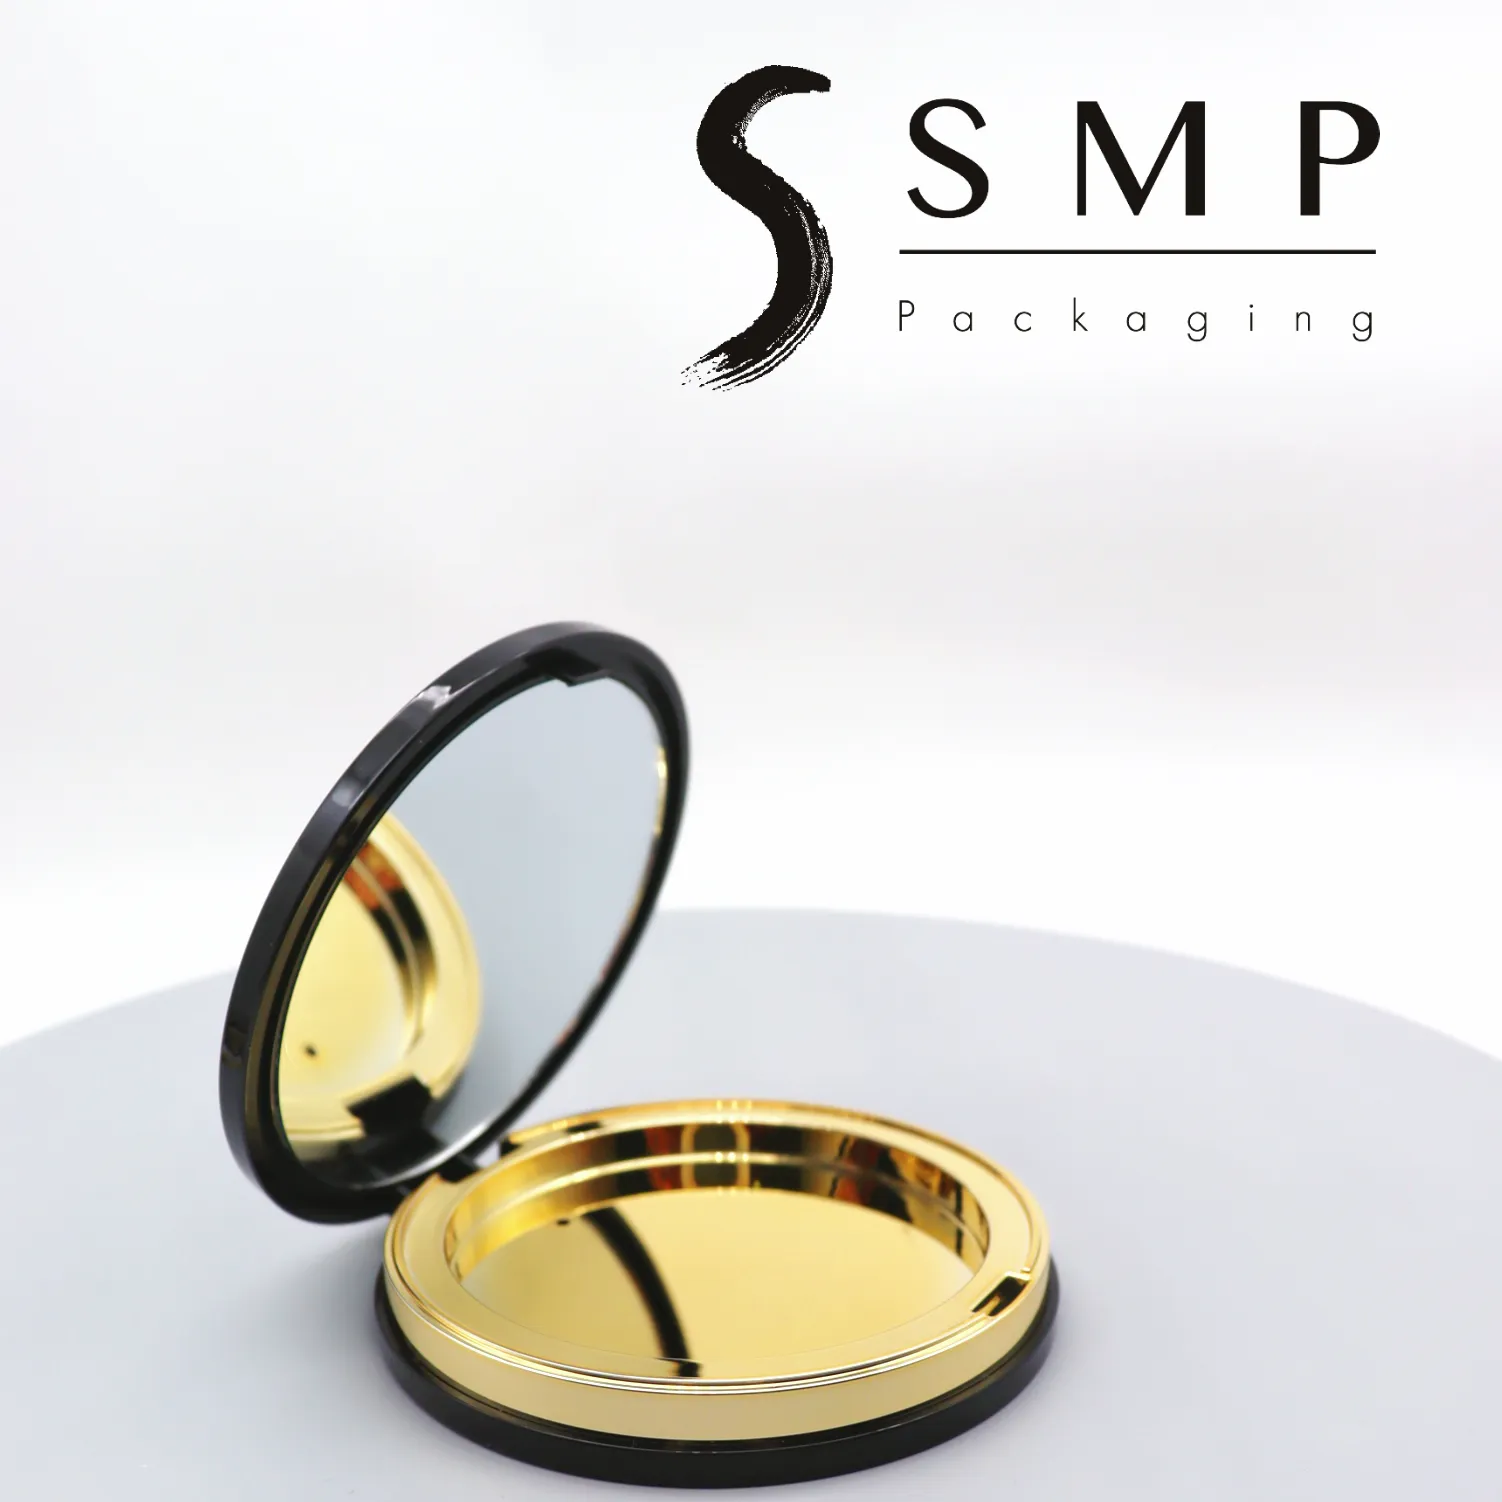 SMP Round Luxury Empty Pressed Powder Container Blush Powder Compact Packaging Compact Powder Case Cosmetic Case